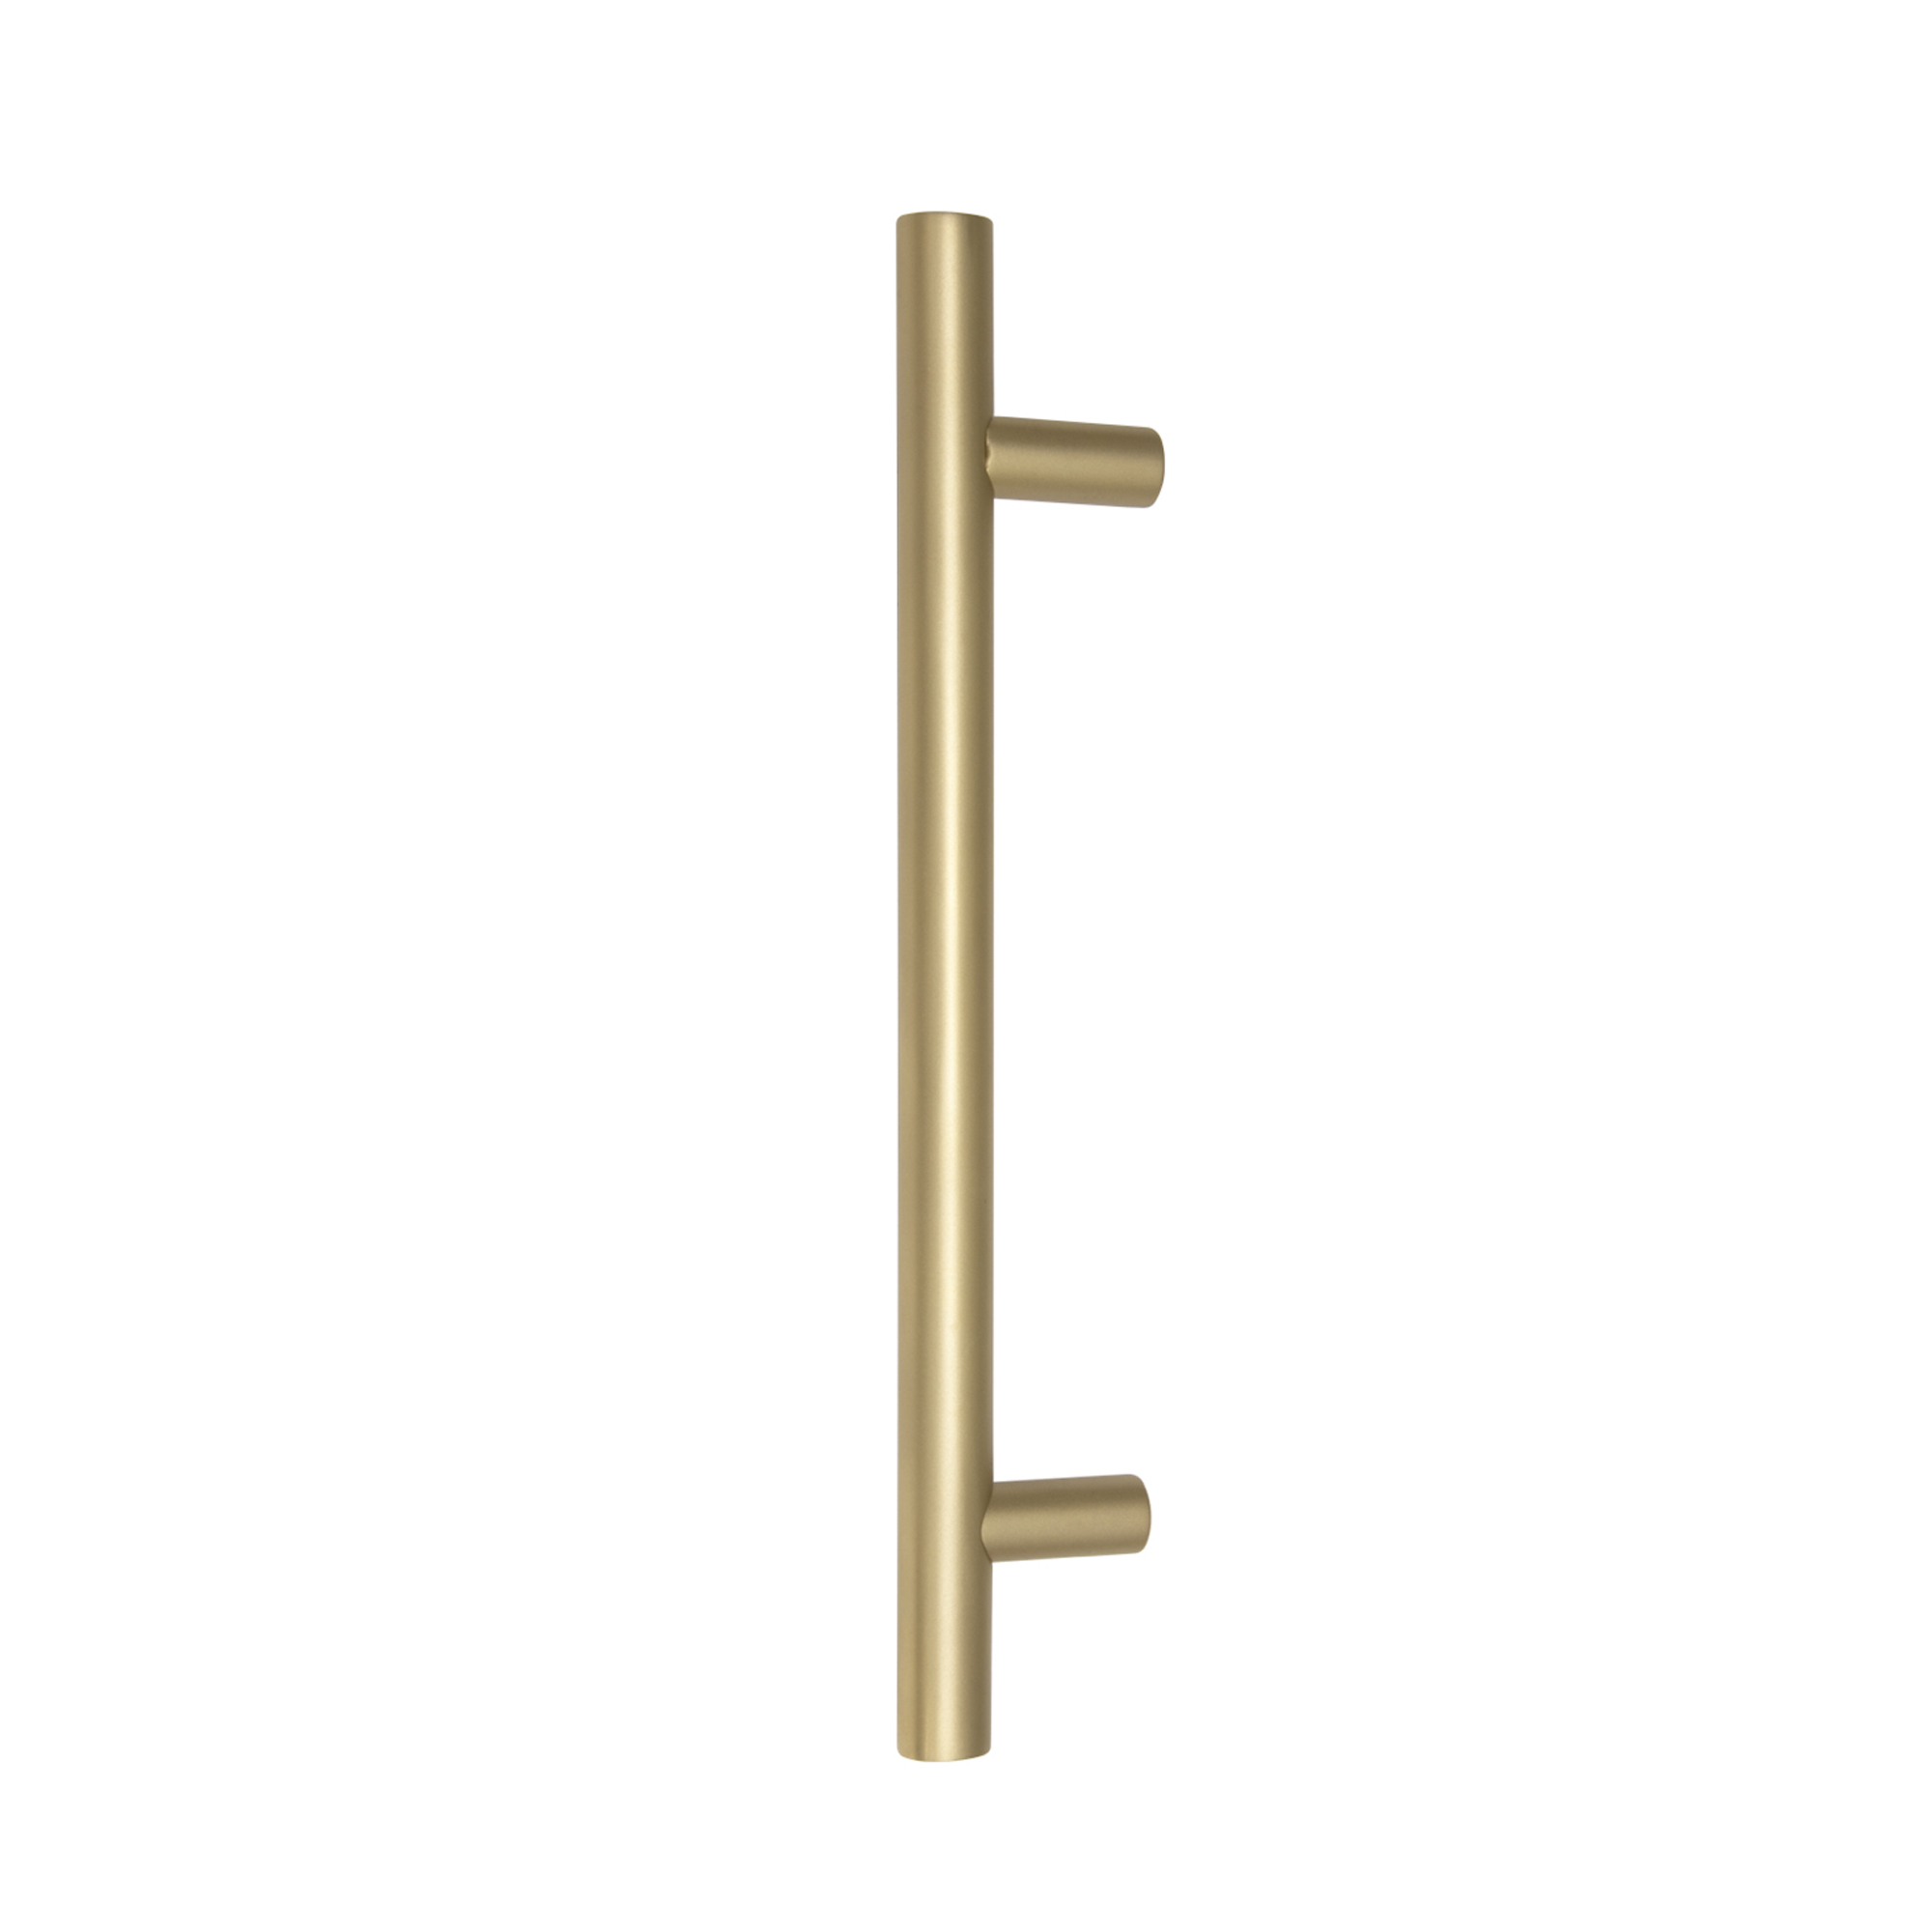 Solid Brass Pull Handles